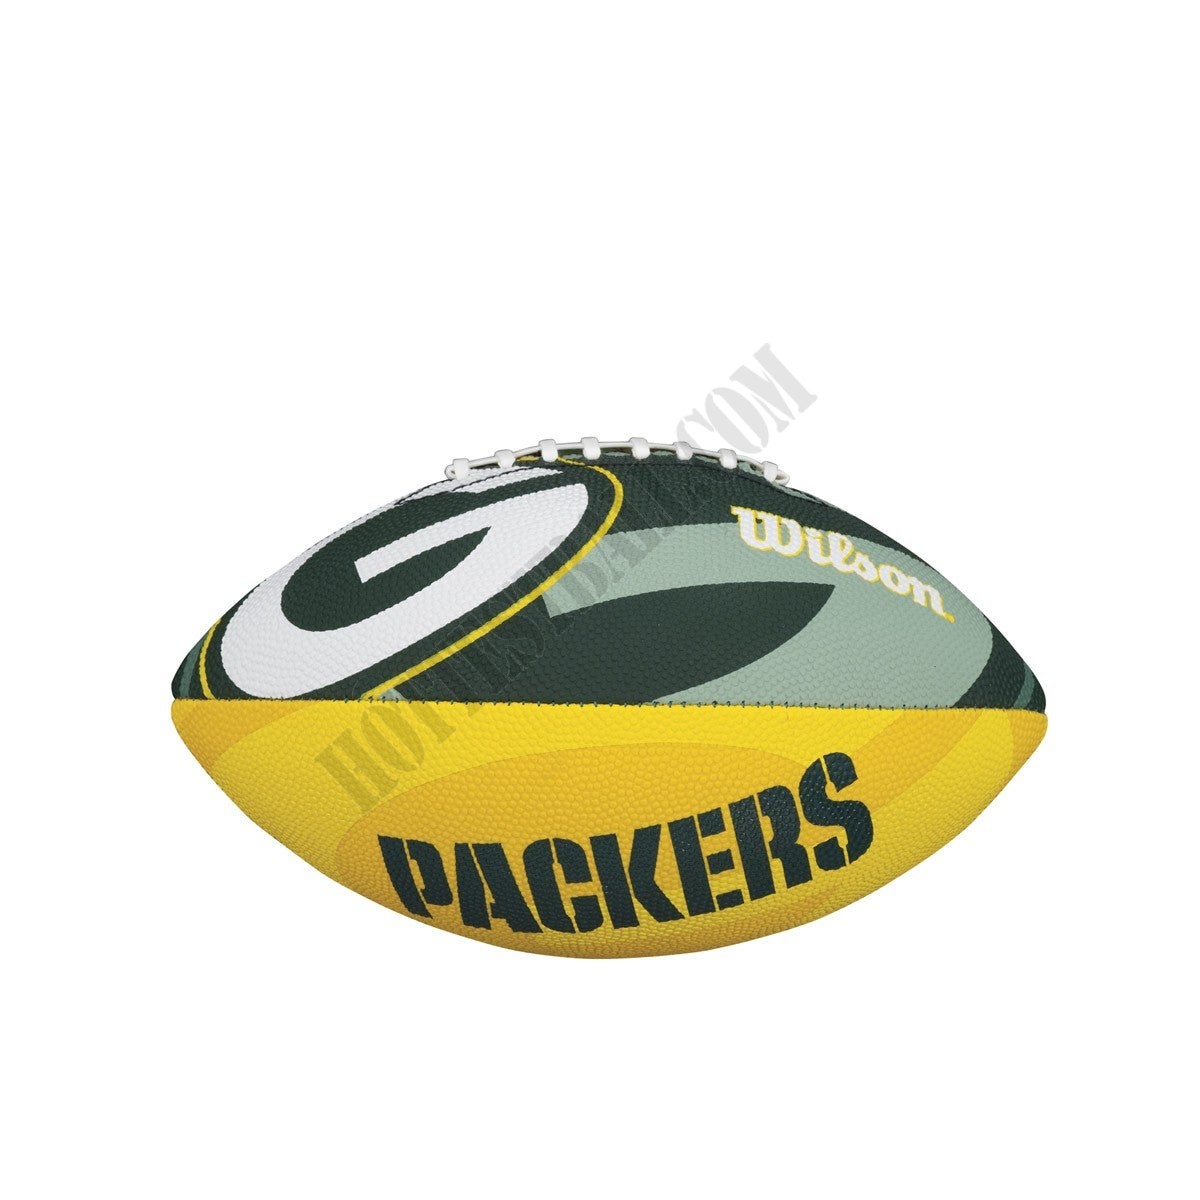 NFL Team Tailgate Football - Green Bay Packers ● Wilson Promotions - NFL Team Tailgate Football - Green Bay Packers ● Wilson Promotions